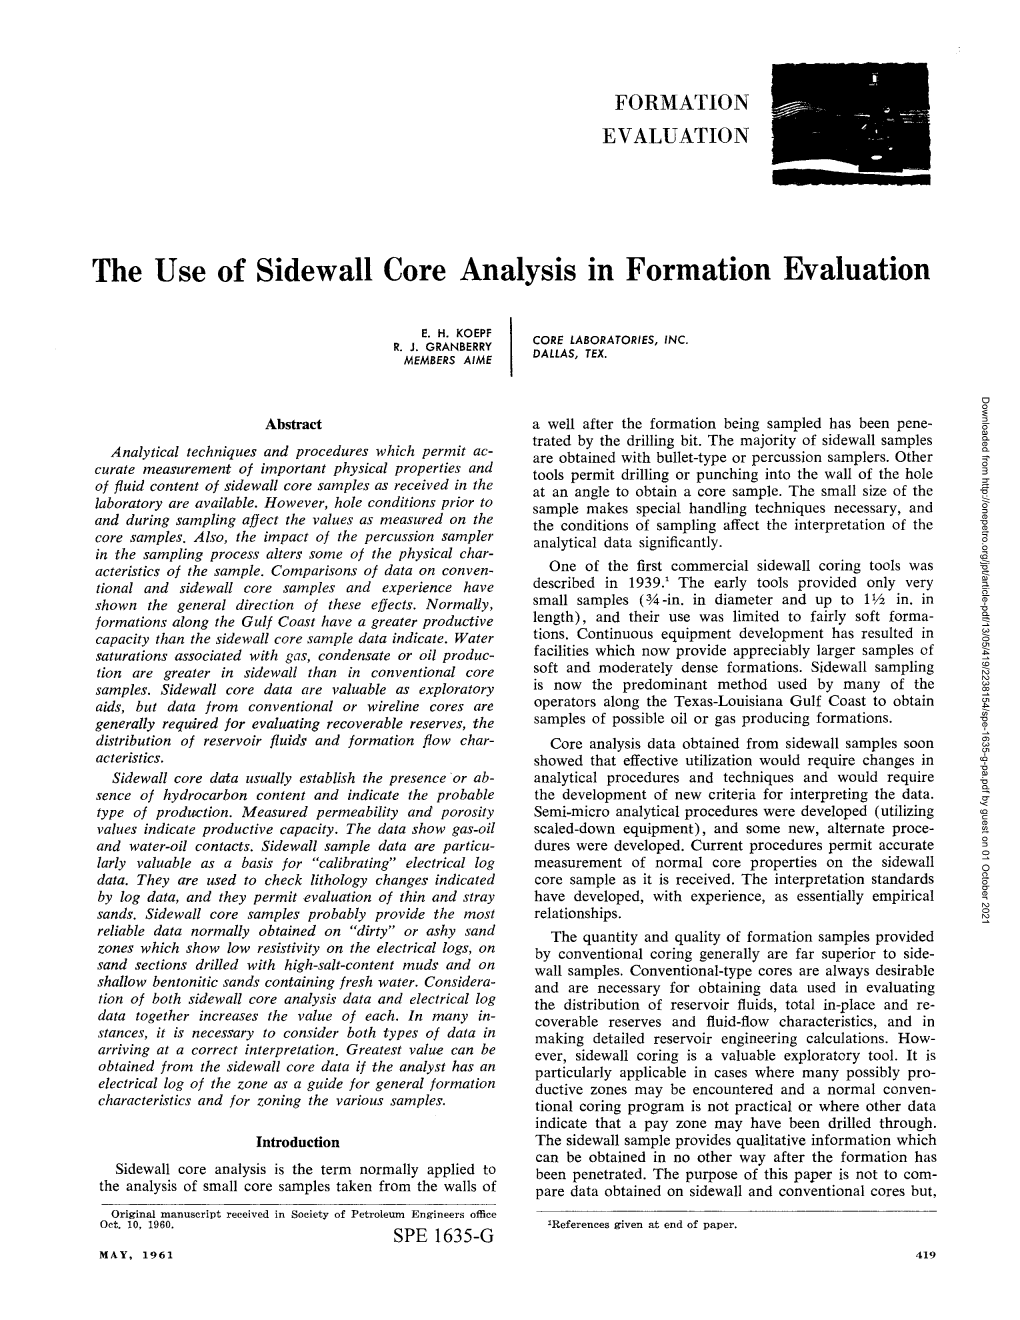 The Use of Sidewall Core Analysis in Formation Evaluation